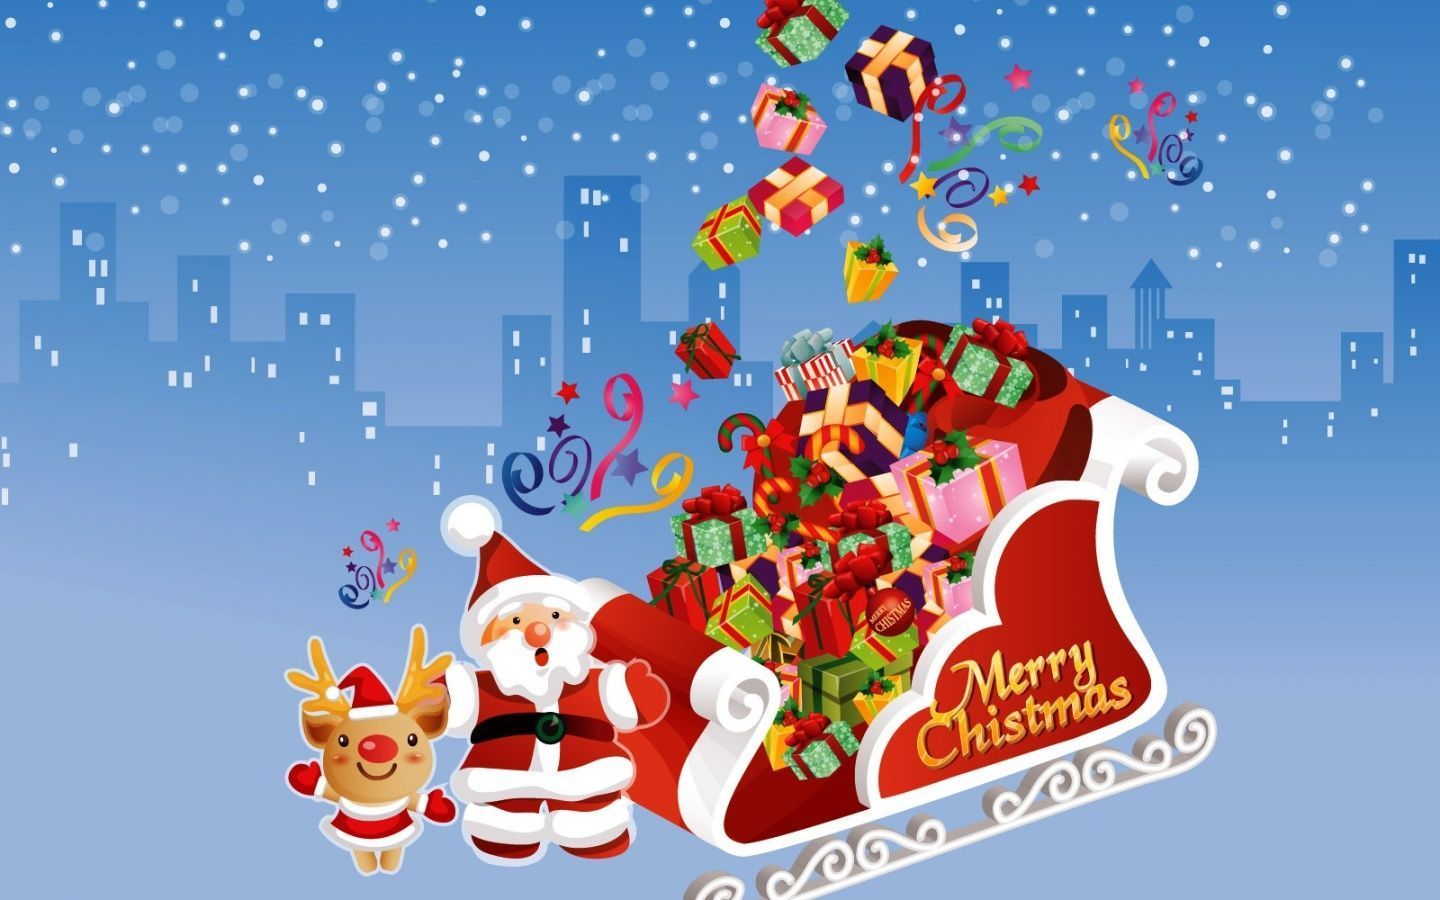 Top 10 Merry Christmas Wallpapers Full HD for Desktop PC | All for ...